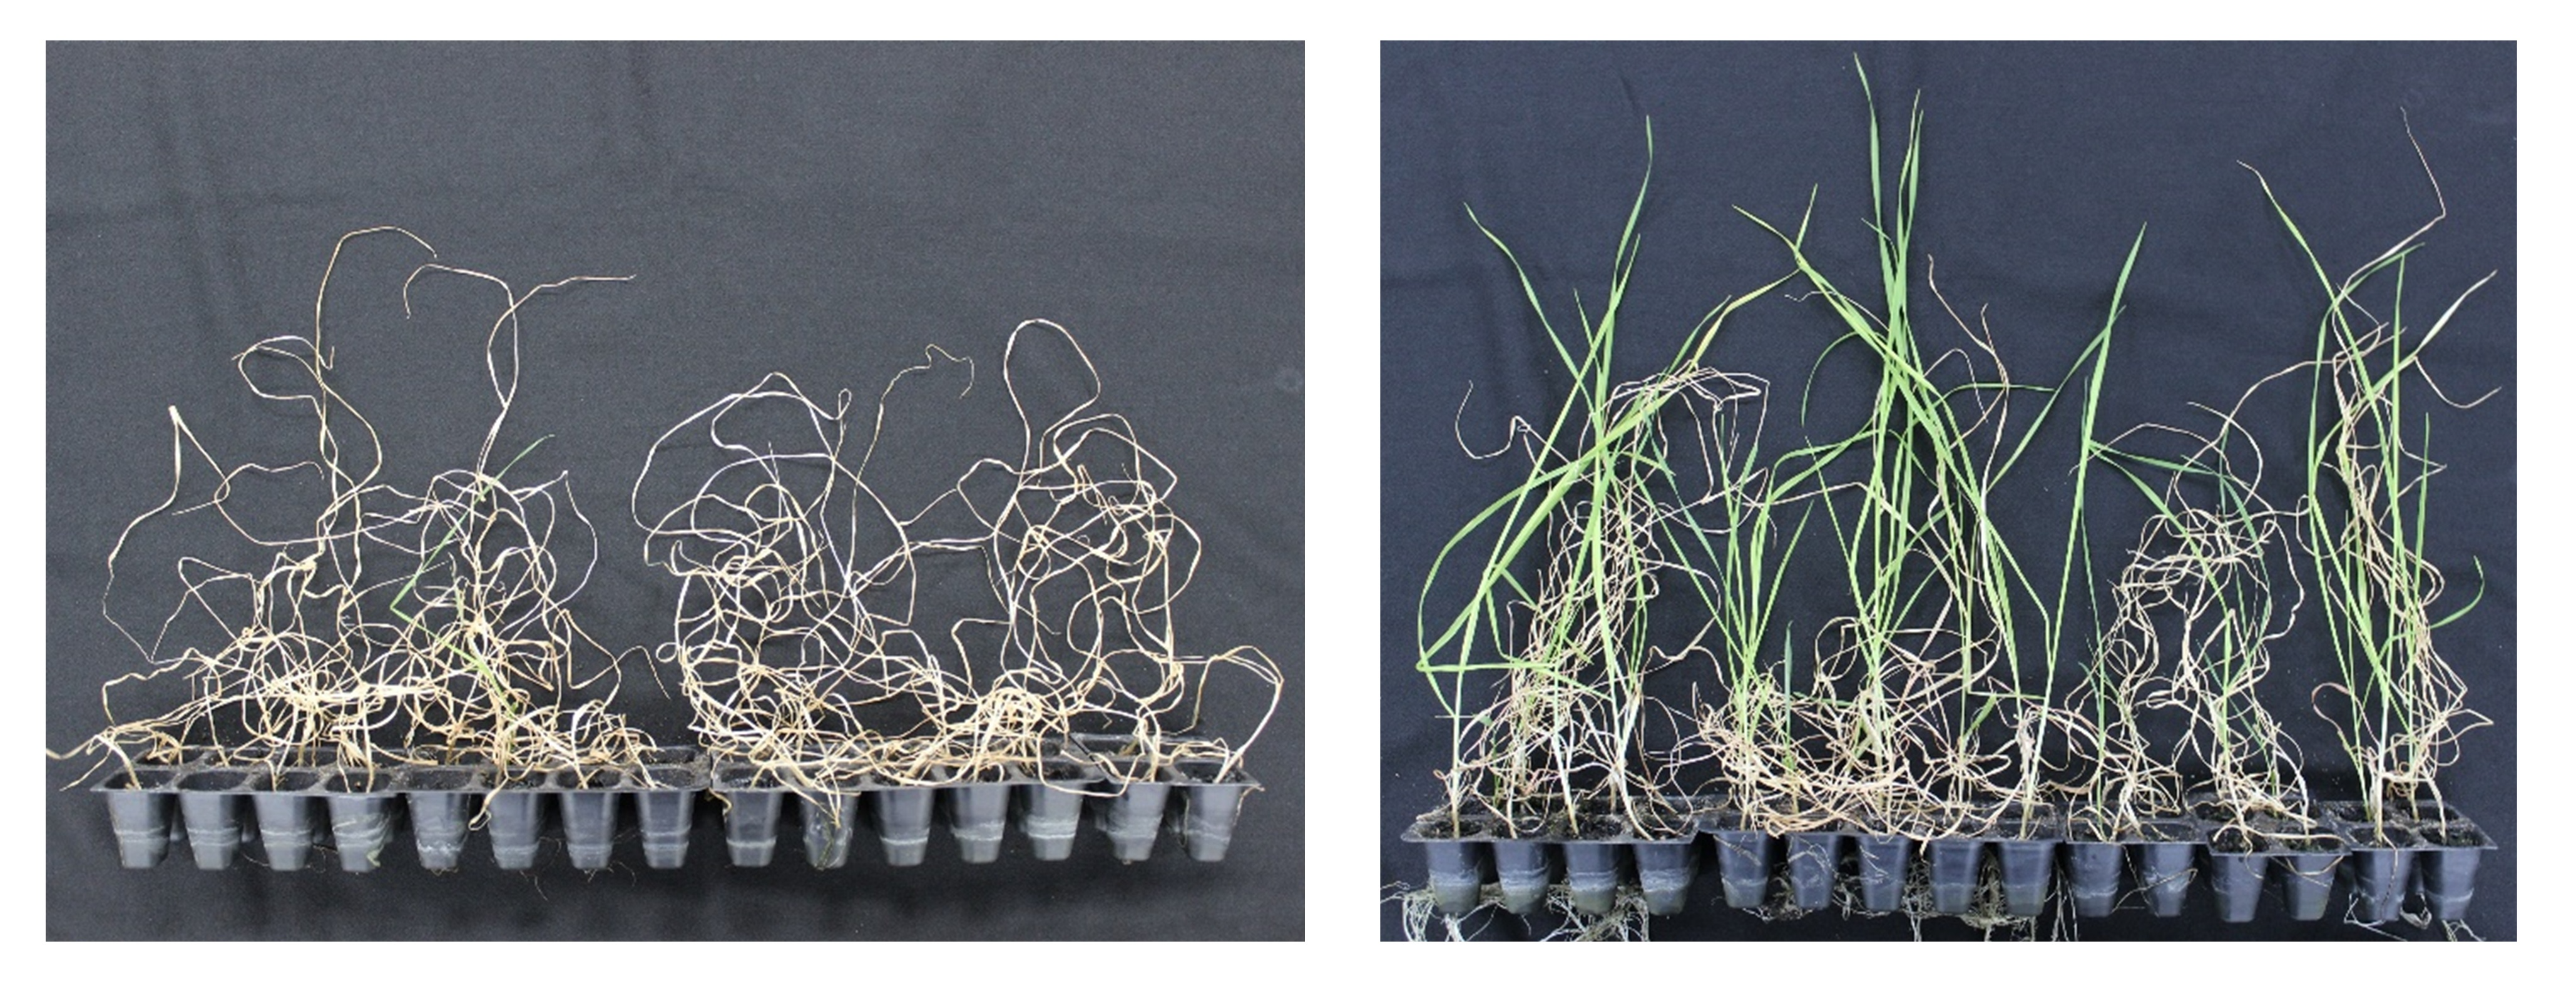 Wheat before and after ethanol treatment